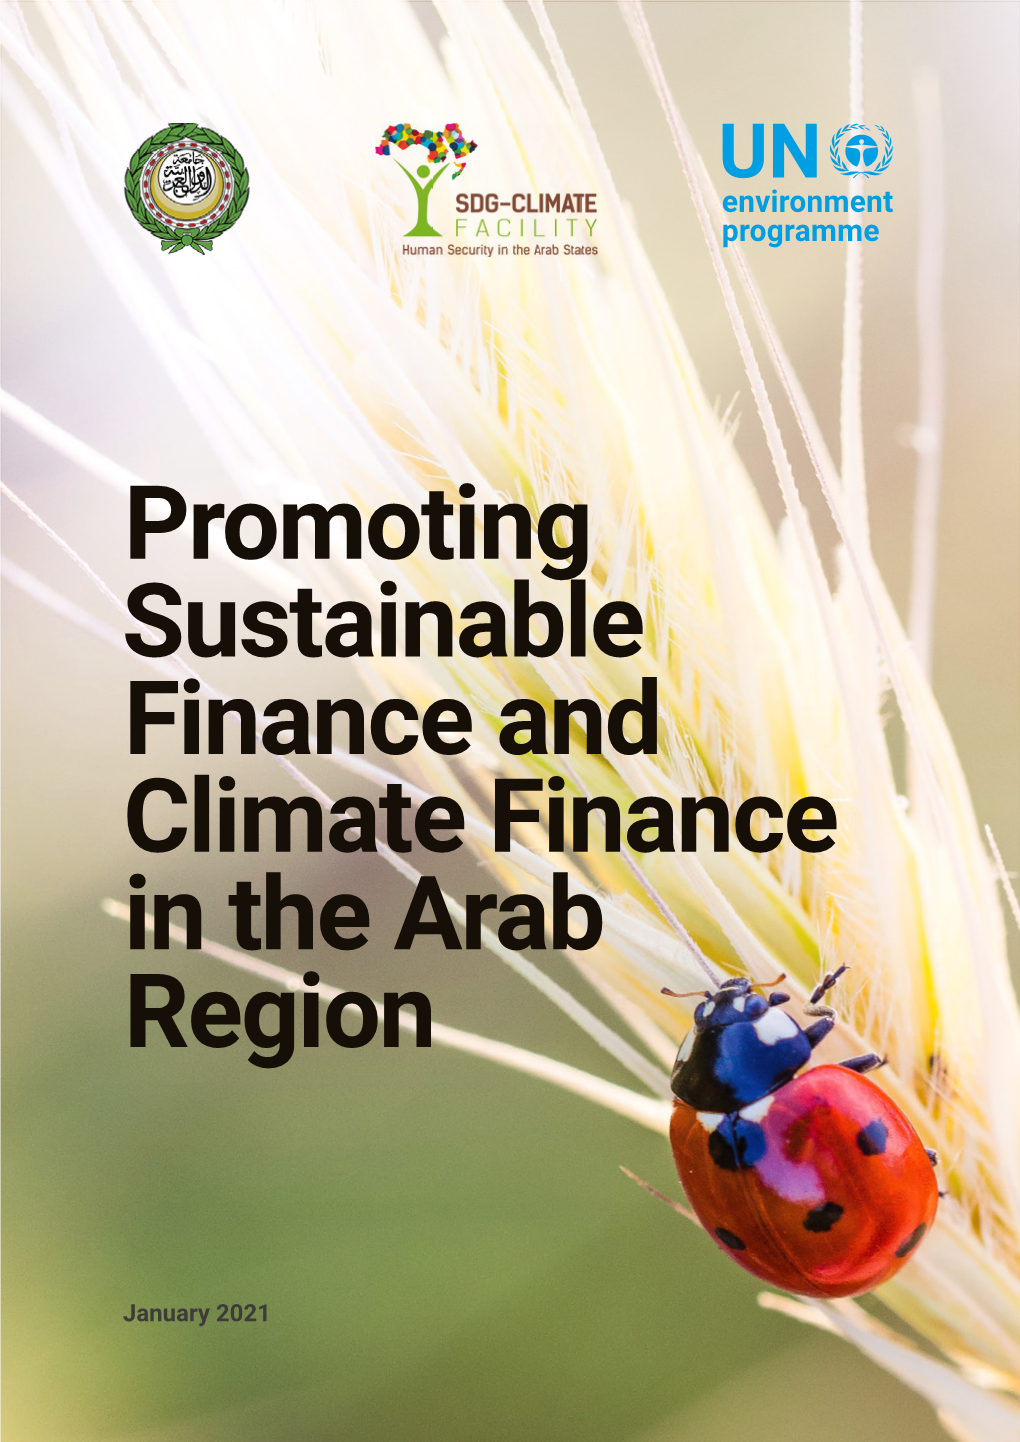 Promoting Sustainable Finance and Climate Finance in the Arab Region